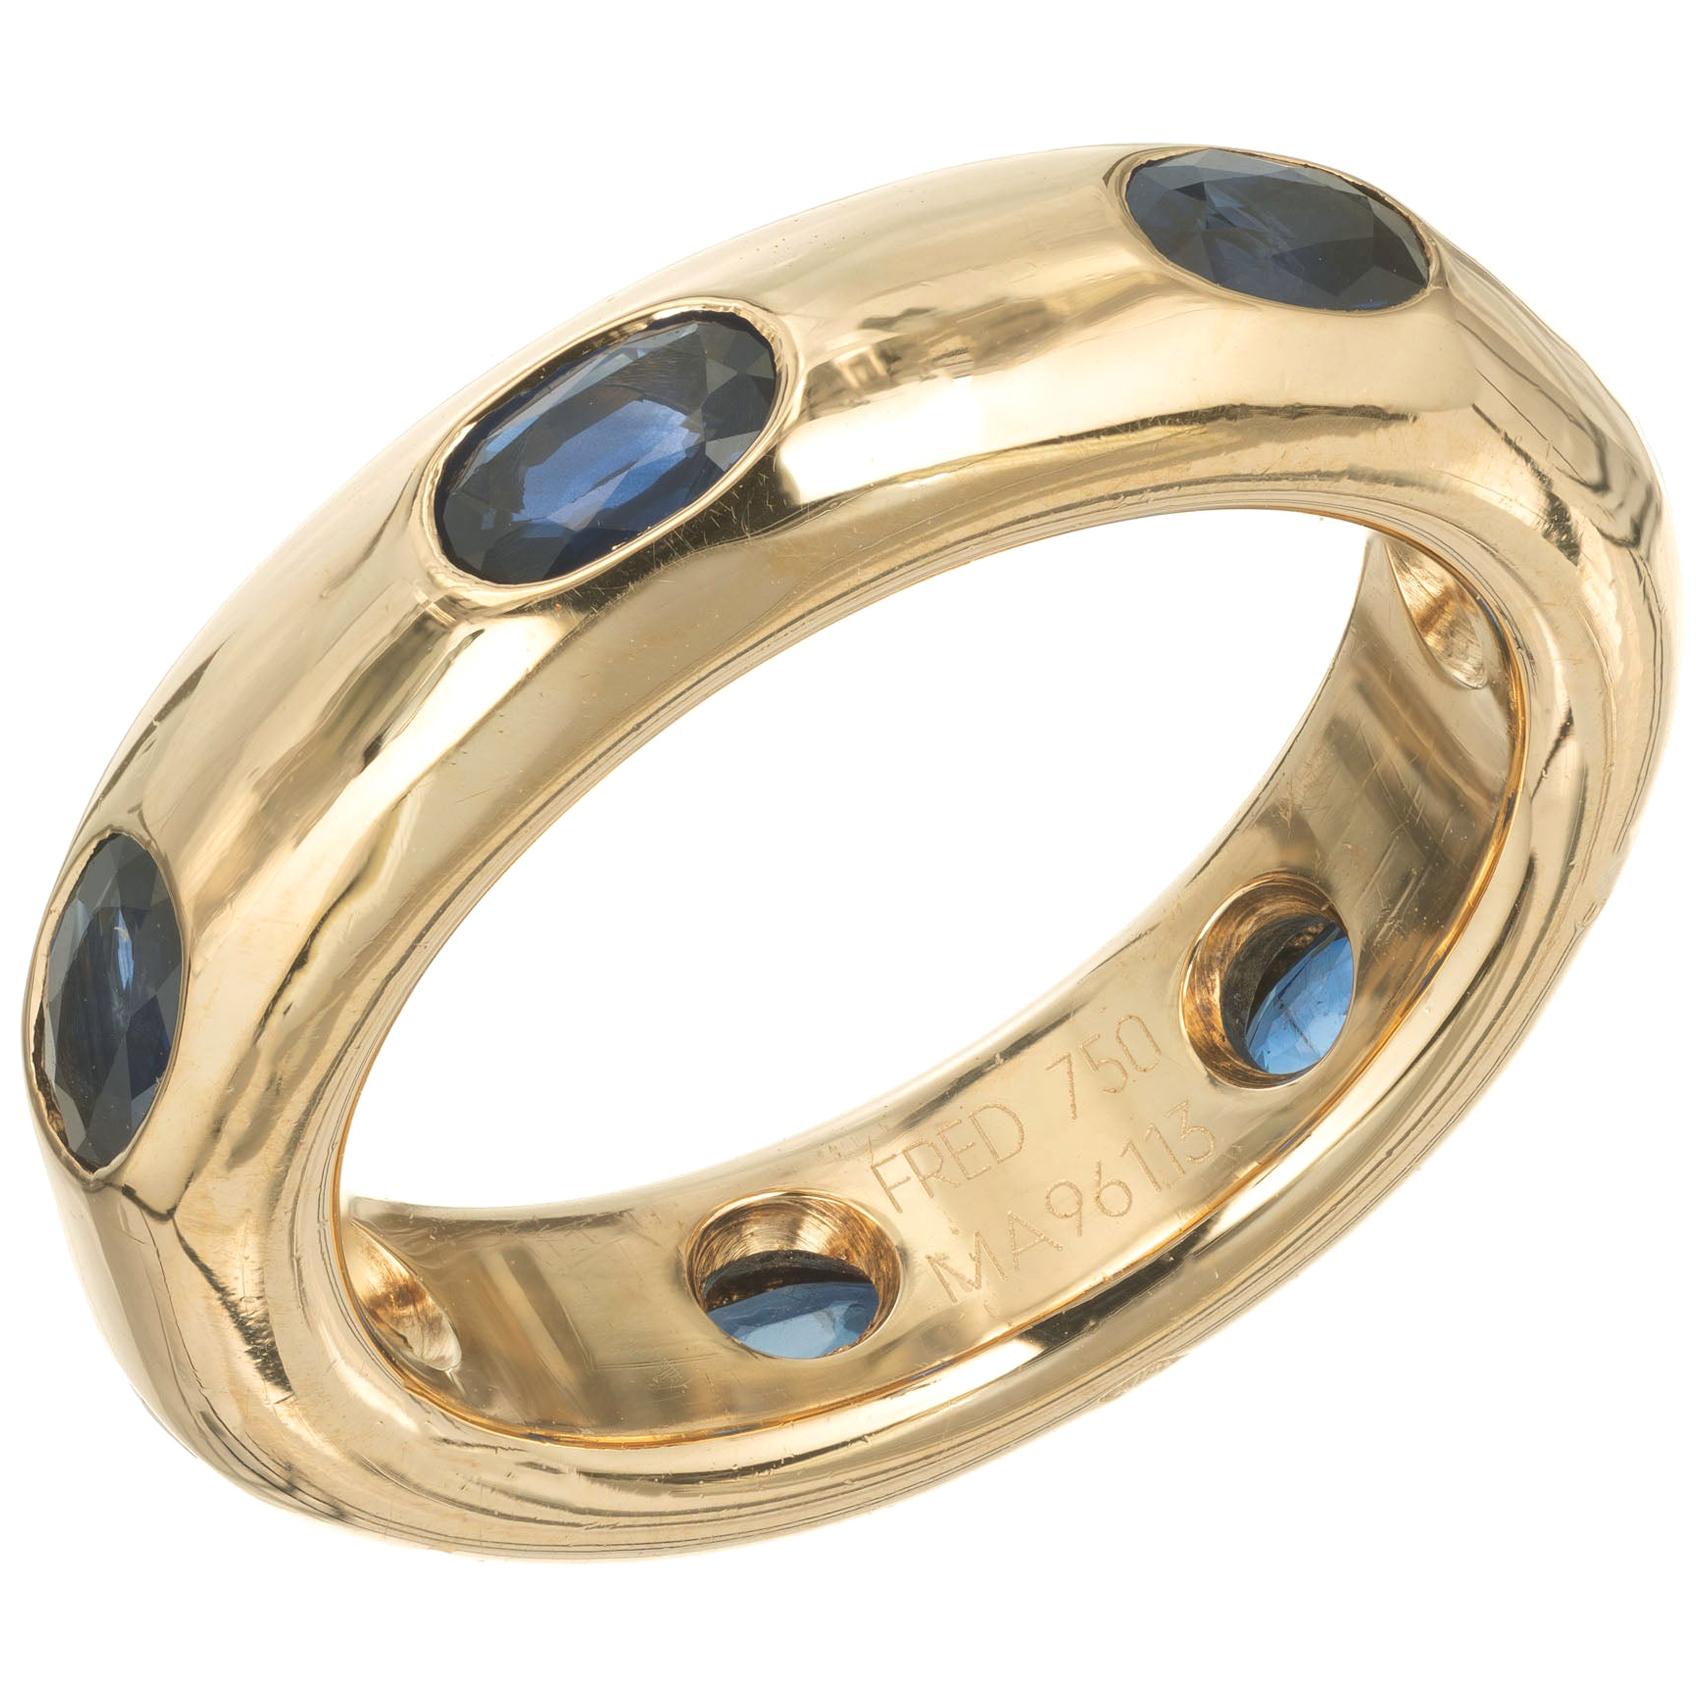 Fred the Jeweler Sapphire Yellow Gold Eternity Band Ring